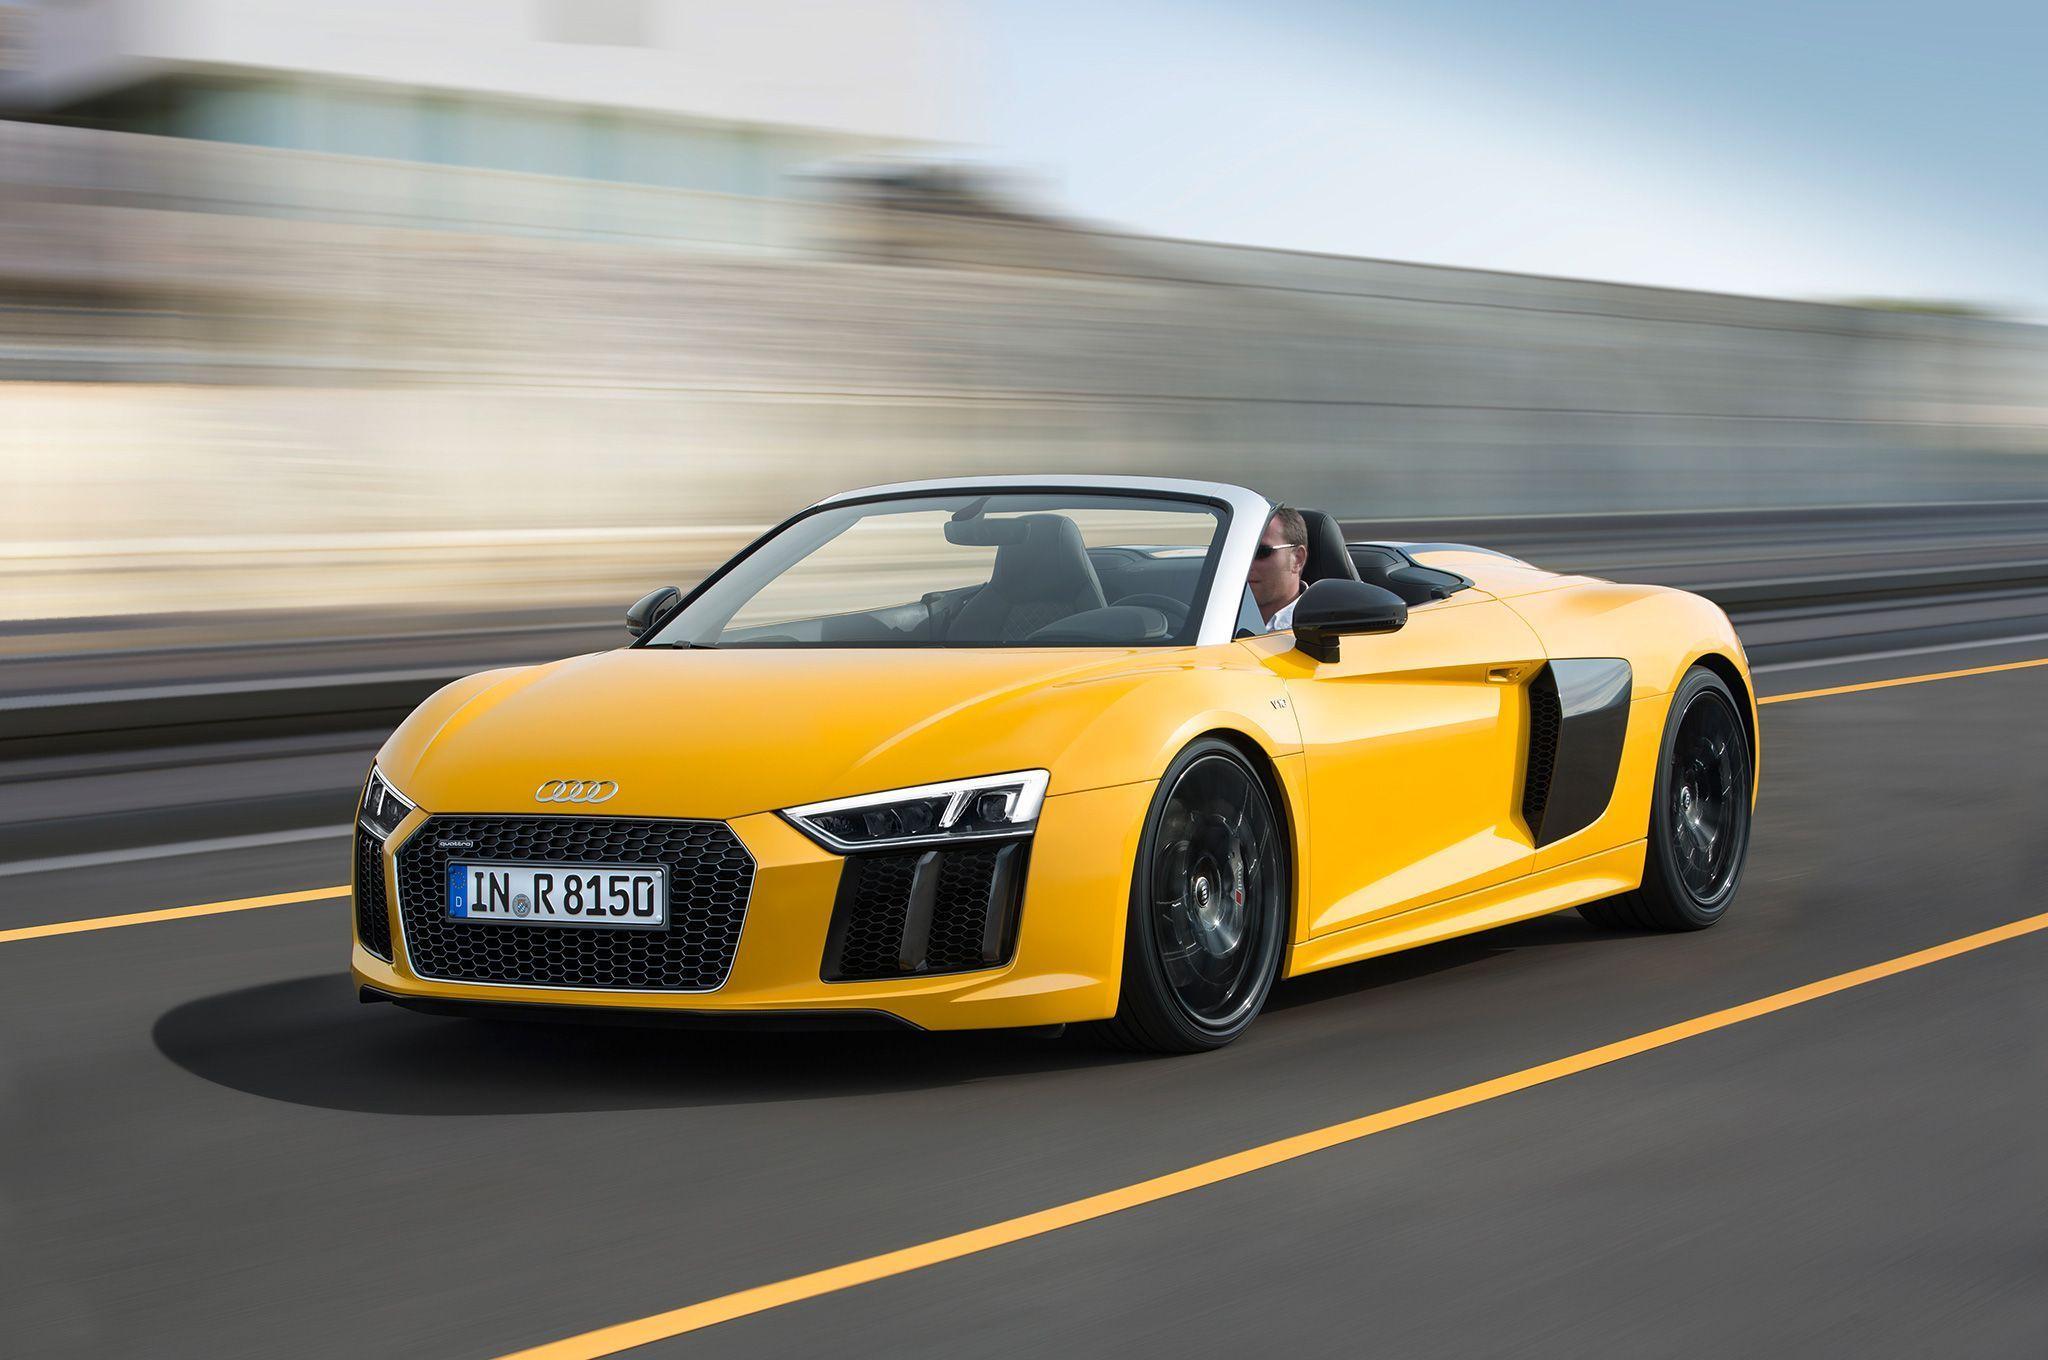 Audi R8 Spyder Wallpaper Full HD Red Convertible Trunk Space